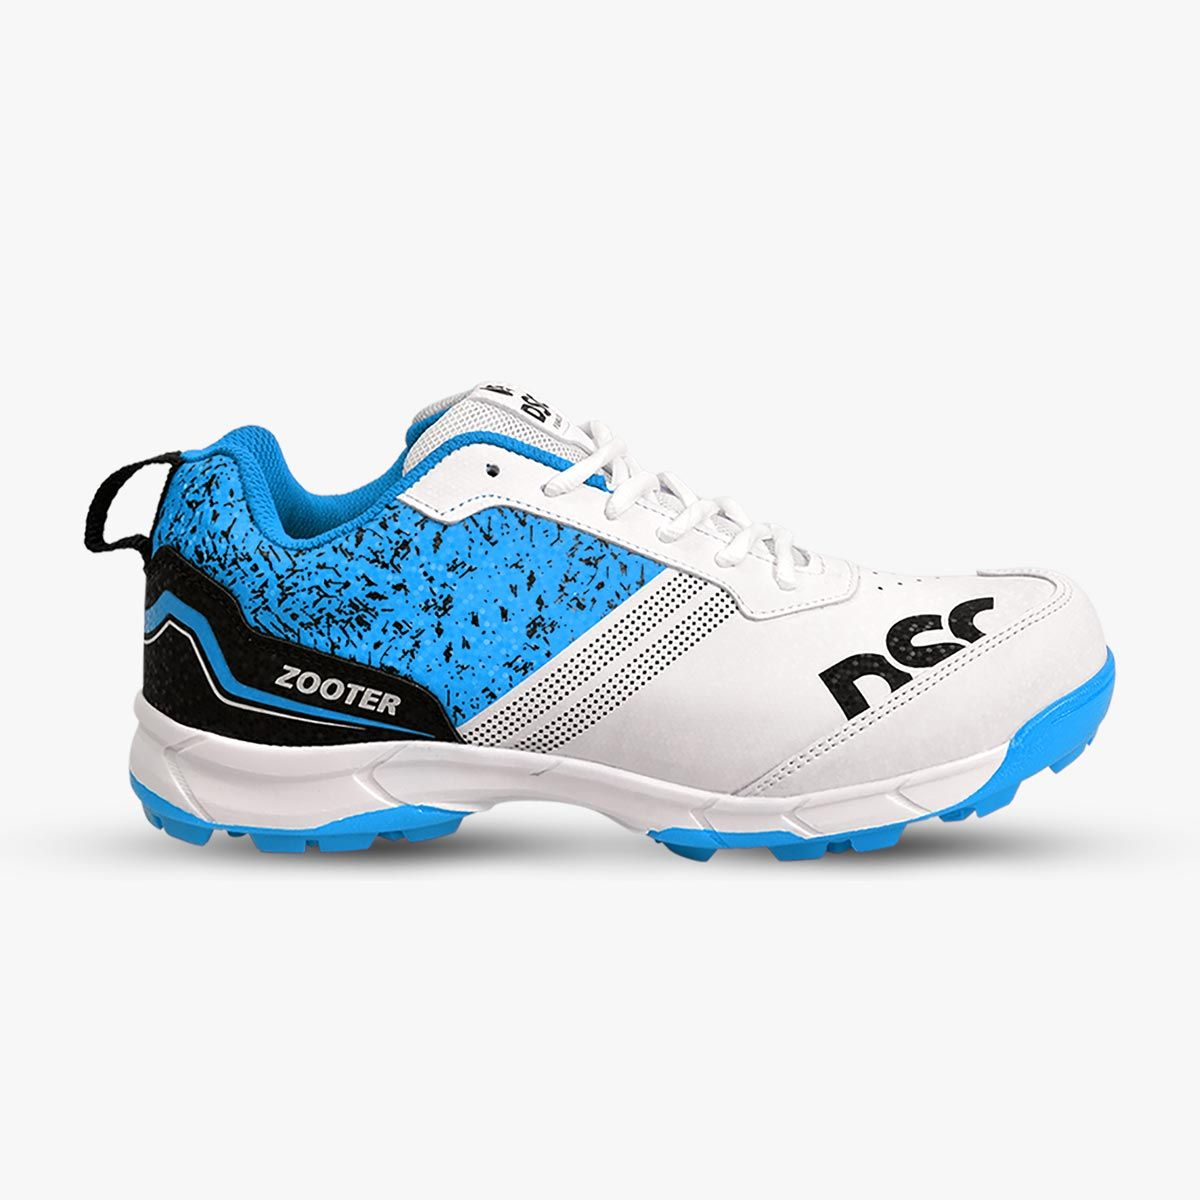 DSC Zooter Cricket Shoes Blue and White